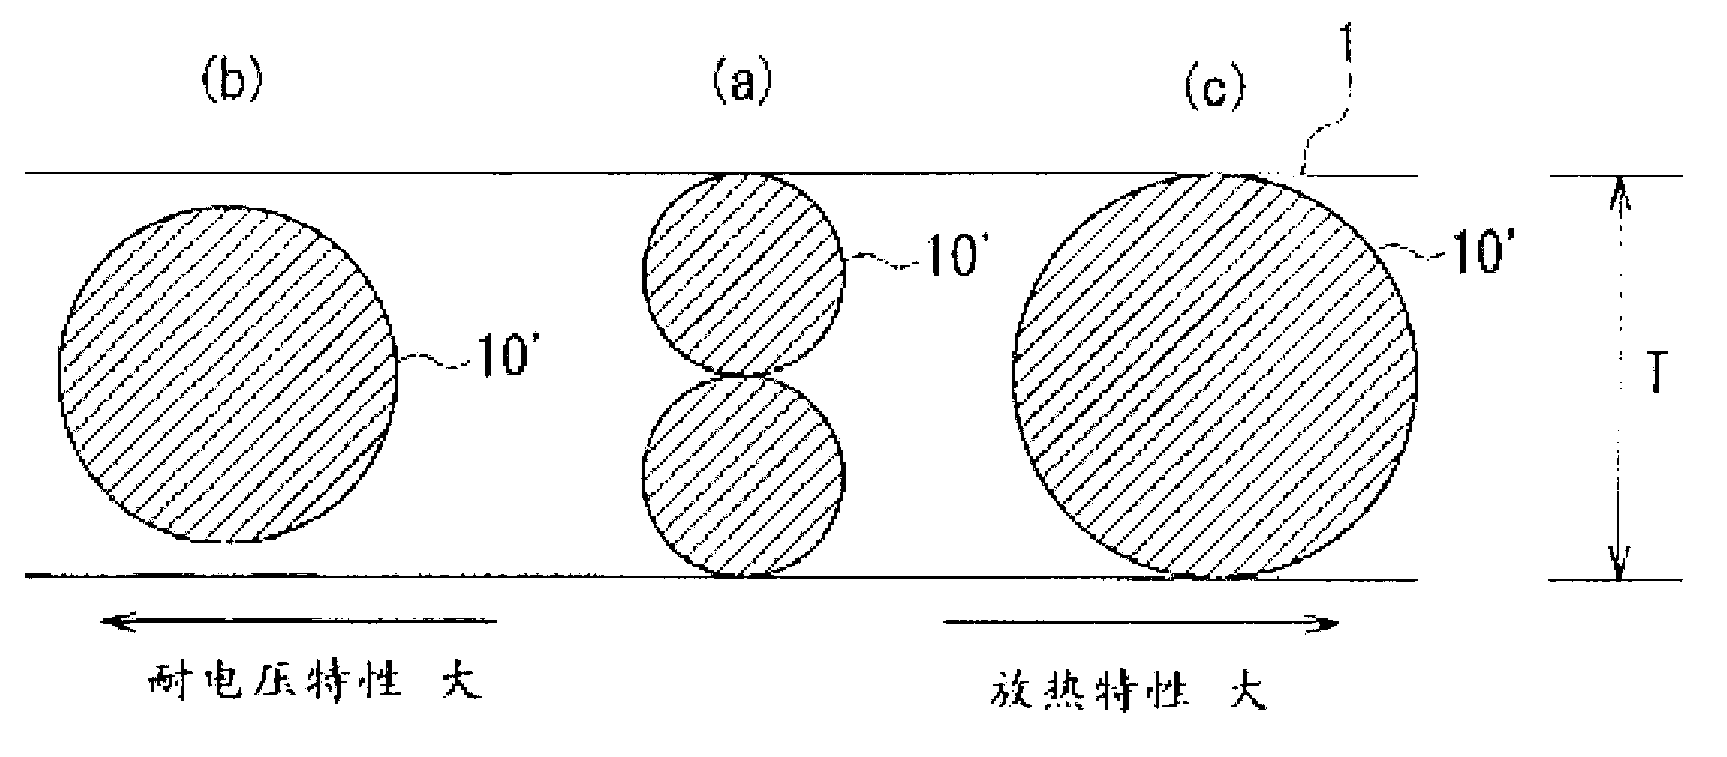 Highly thermally conductive resin cured product, highly thermally conductive semi-cured resin film, method of manufacturing same, and highly thermally conductive resin composition